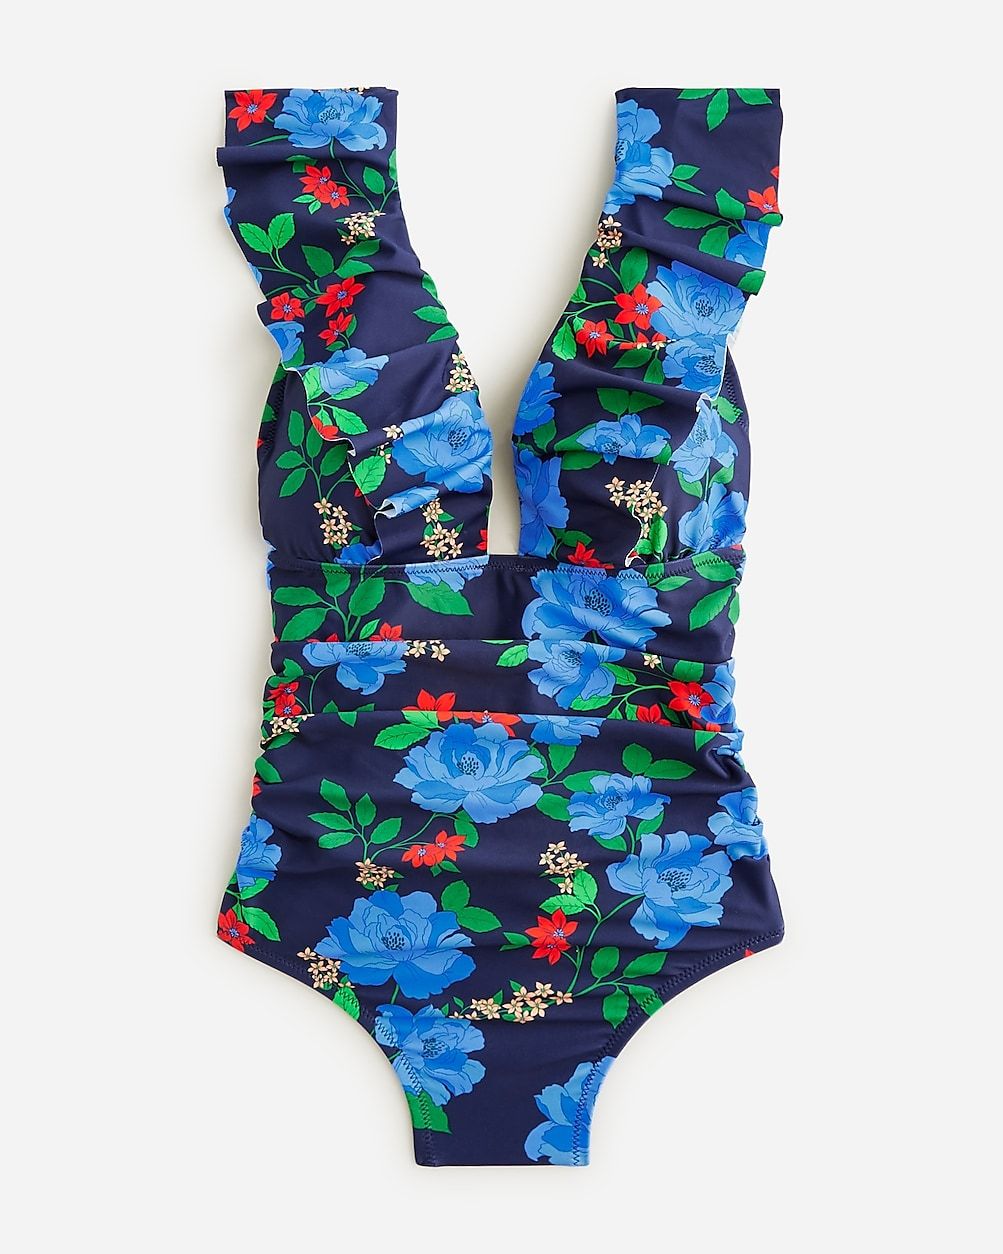 Ruffle V-neck ruched one-piece swimsuit in blue peony floral | J.Crew US